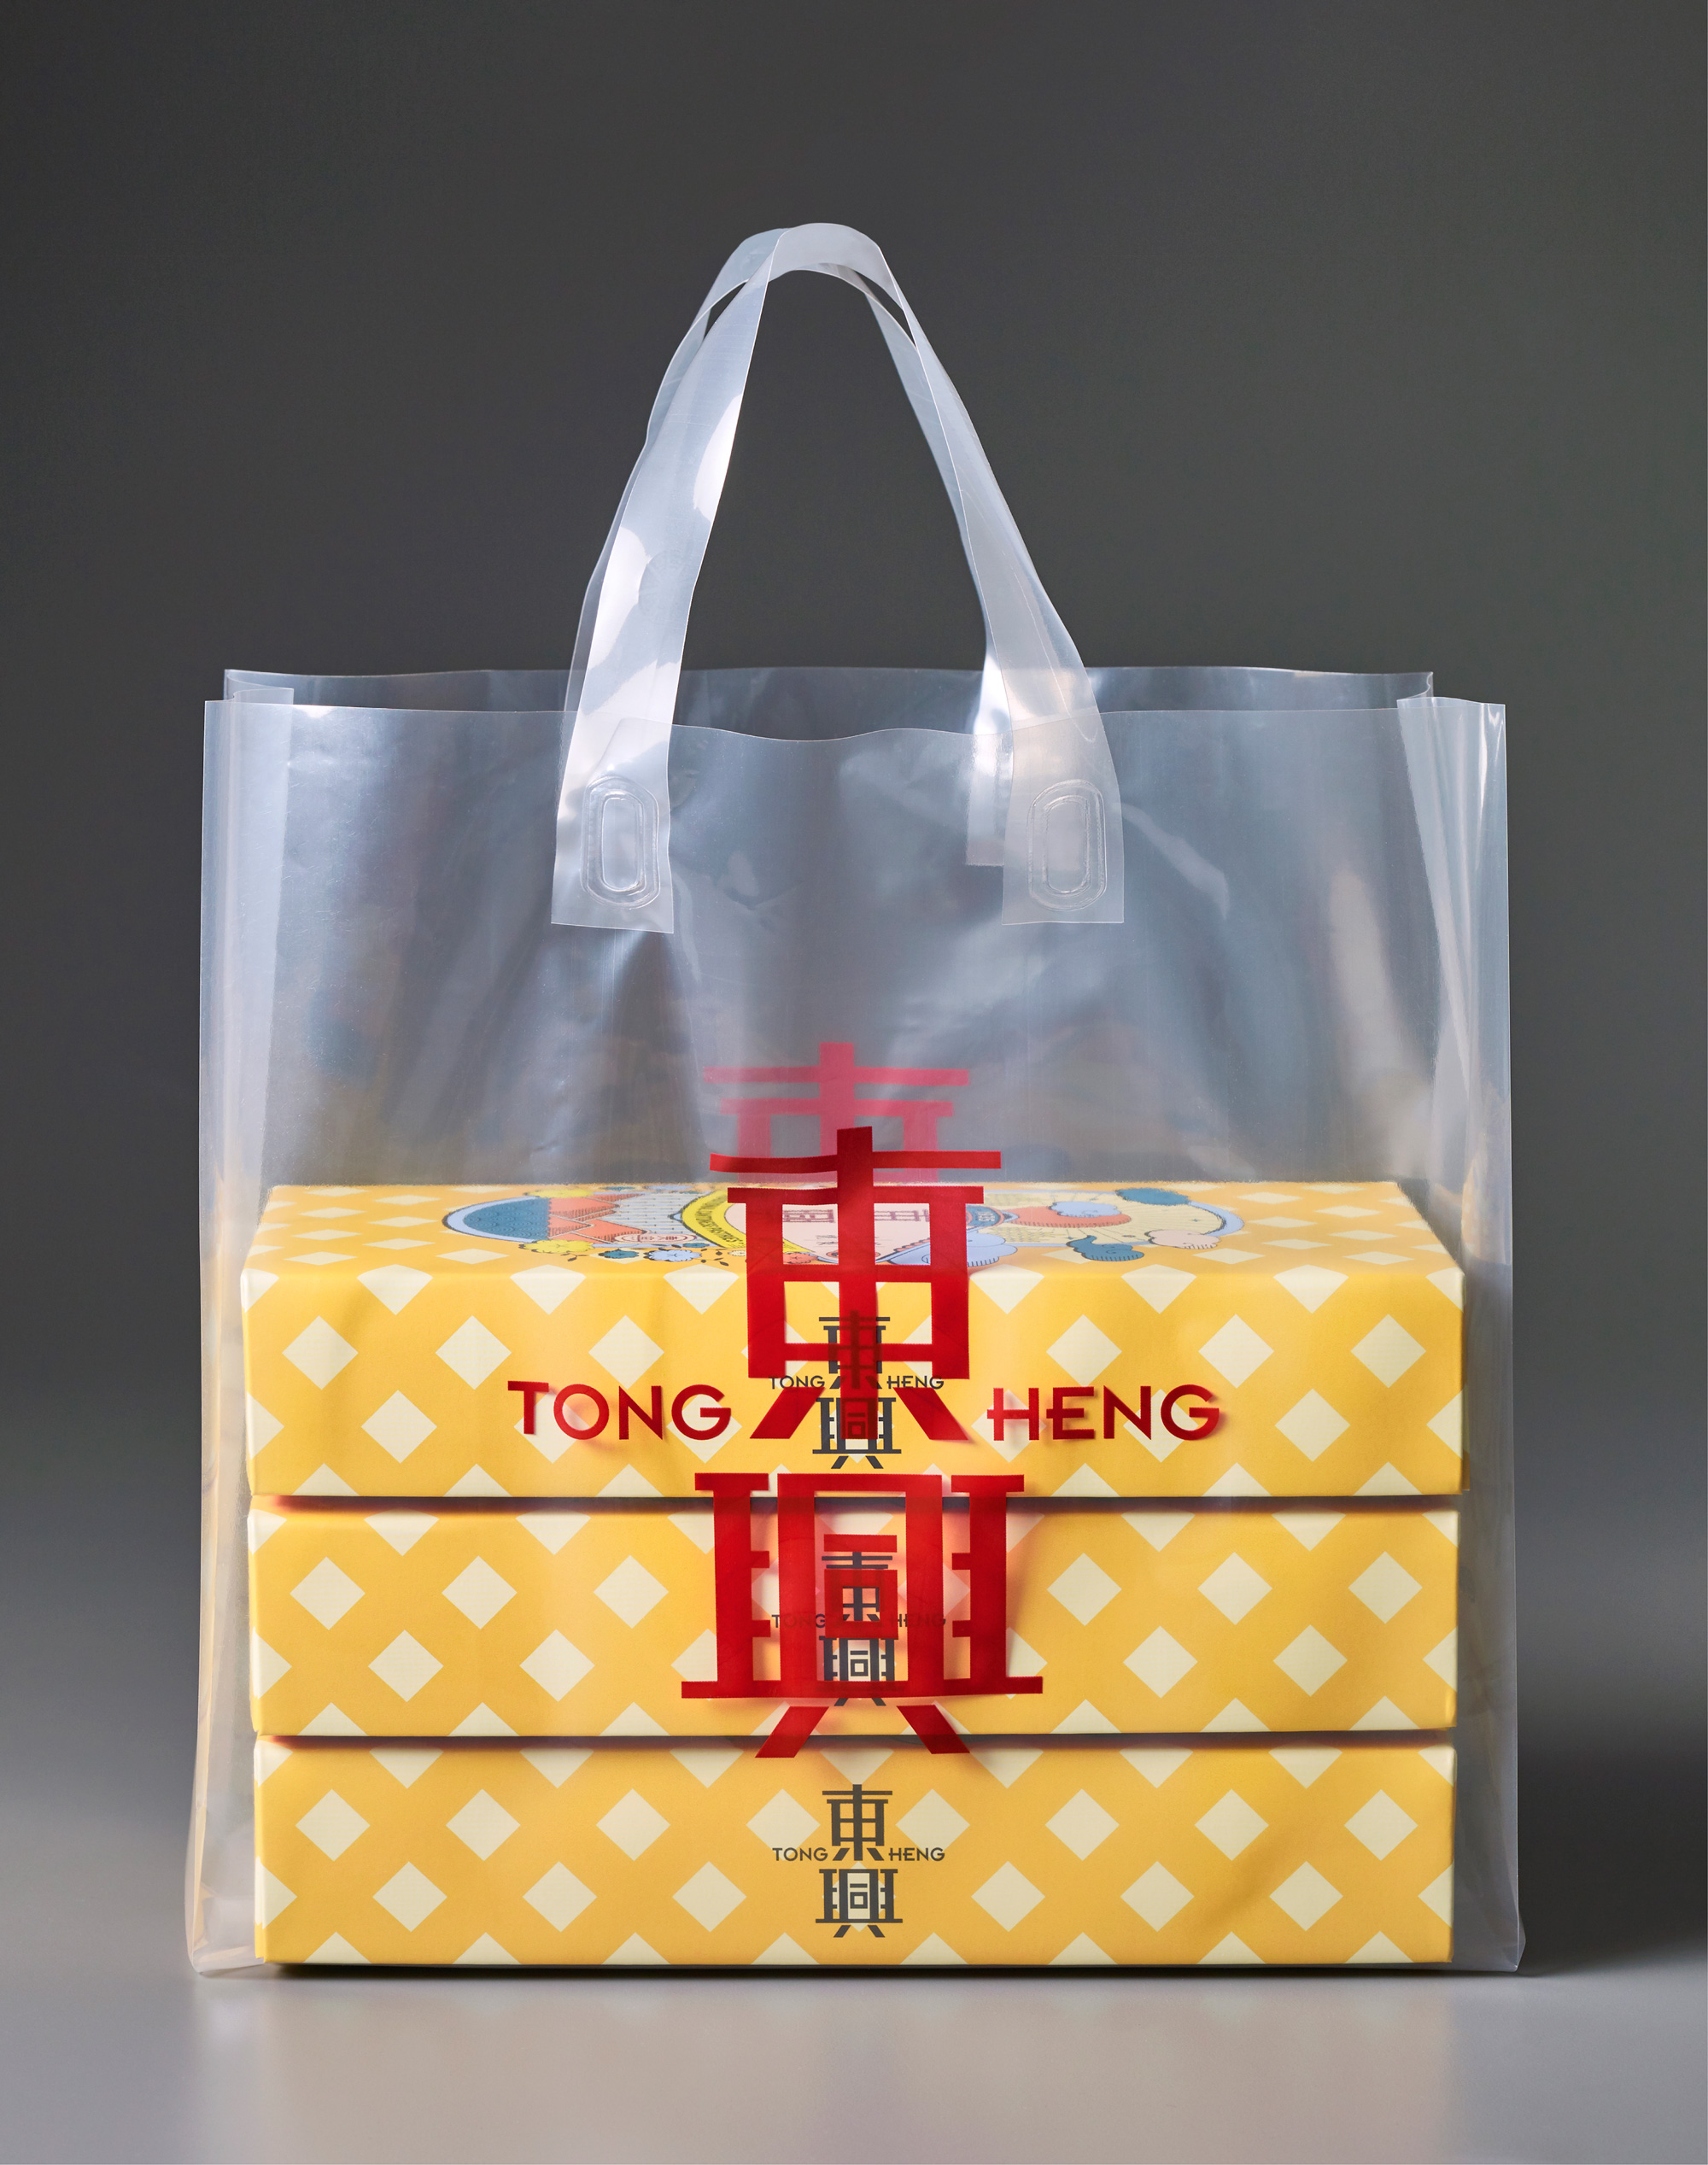 New Logo, Identity, and Packaging for Tong Heng by &Larry